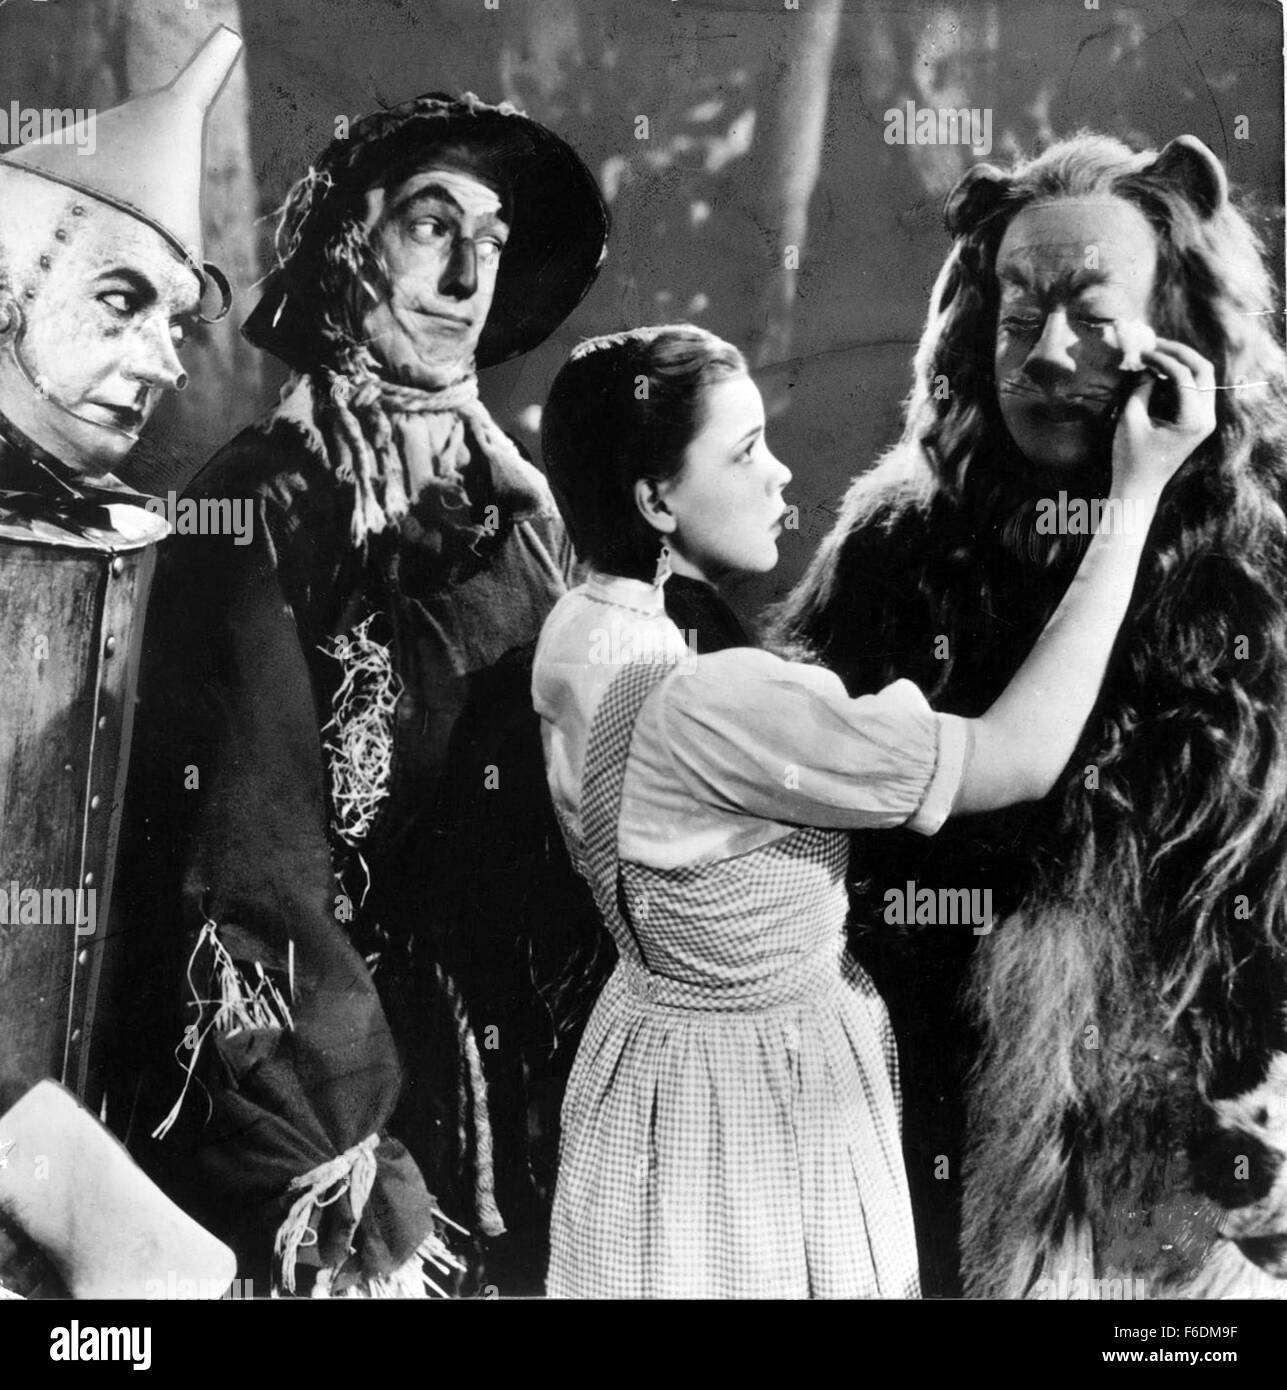 RELEASED:  Aug 12, 1939 - Original Film Title: The Wizard of Oz. PICTURED: JACK HALEY, JUDY GARLAND,  RAY BOLGER, BERT LAHR. Stock Photo